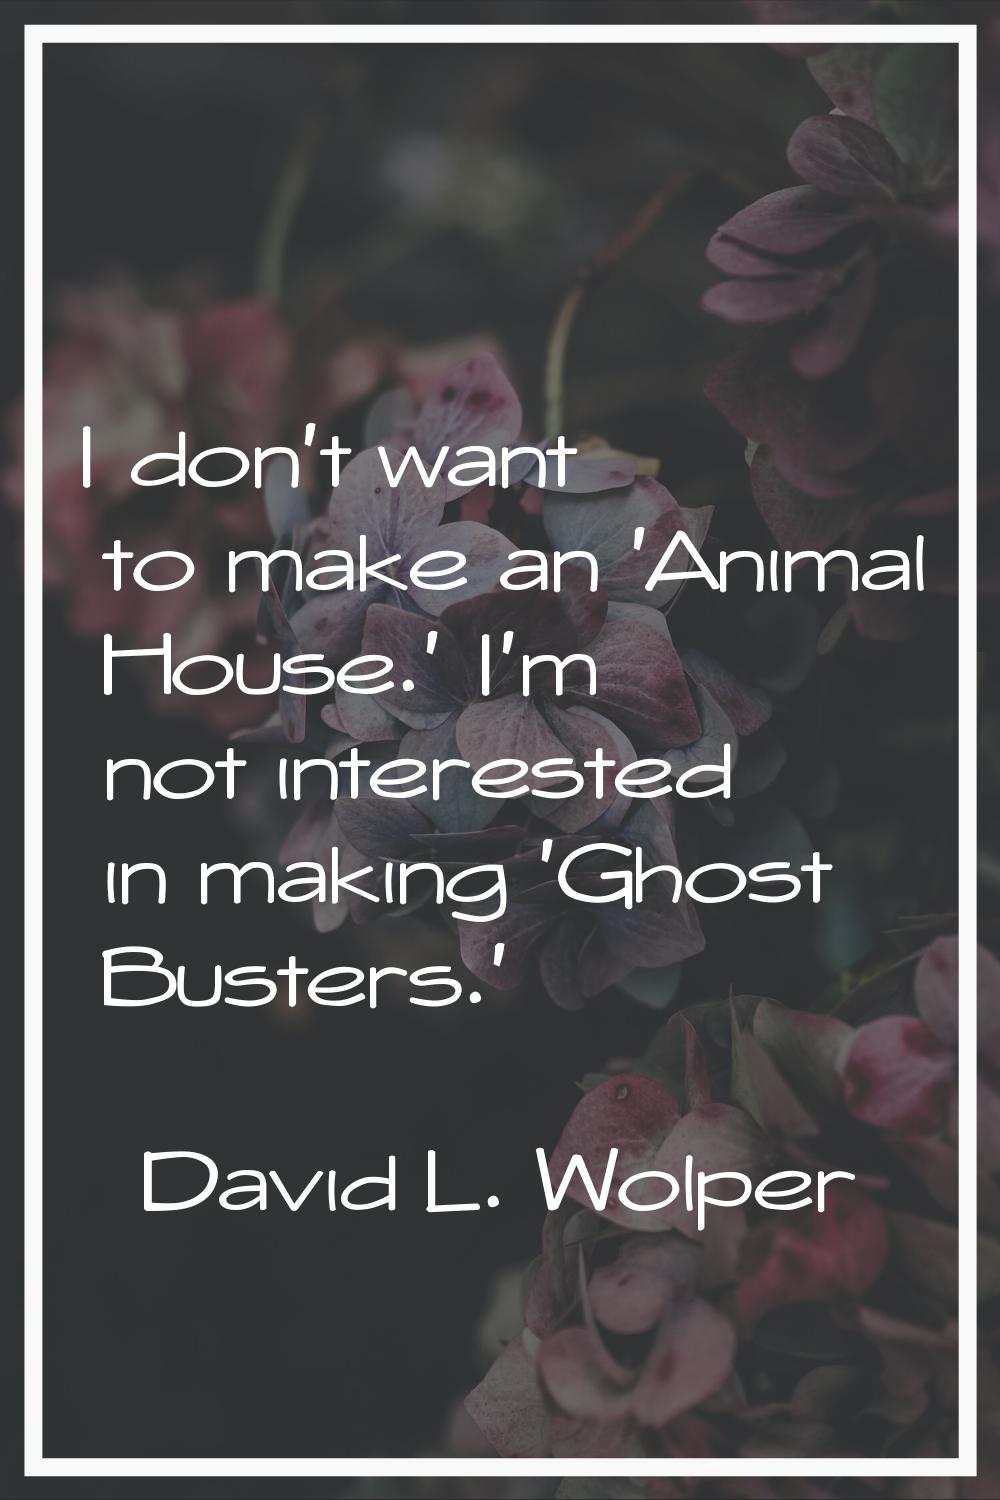 I don't want to make an 'Animal House.' I'm not interested in making 'Ghost Busters.'